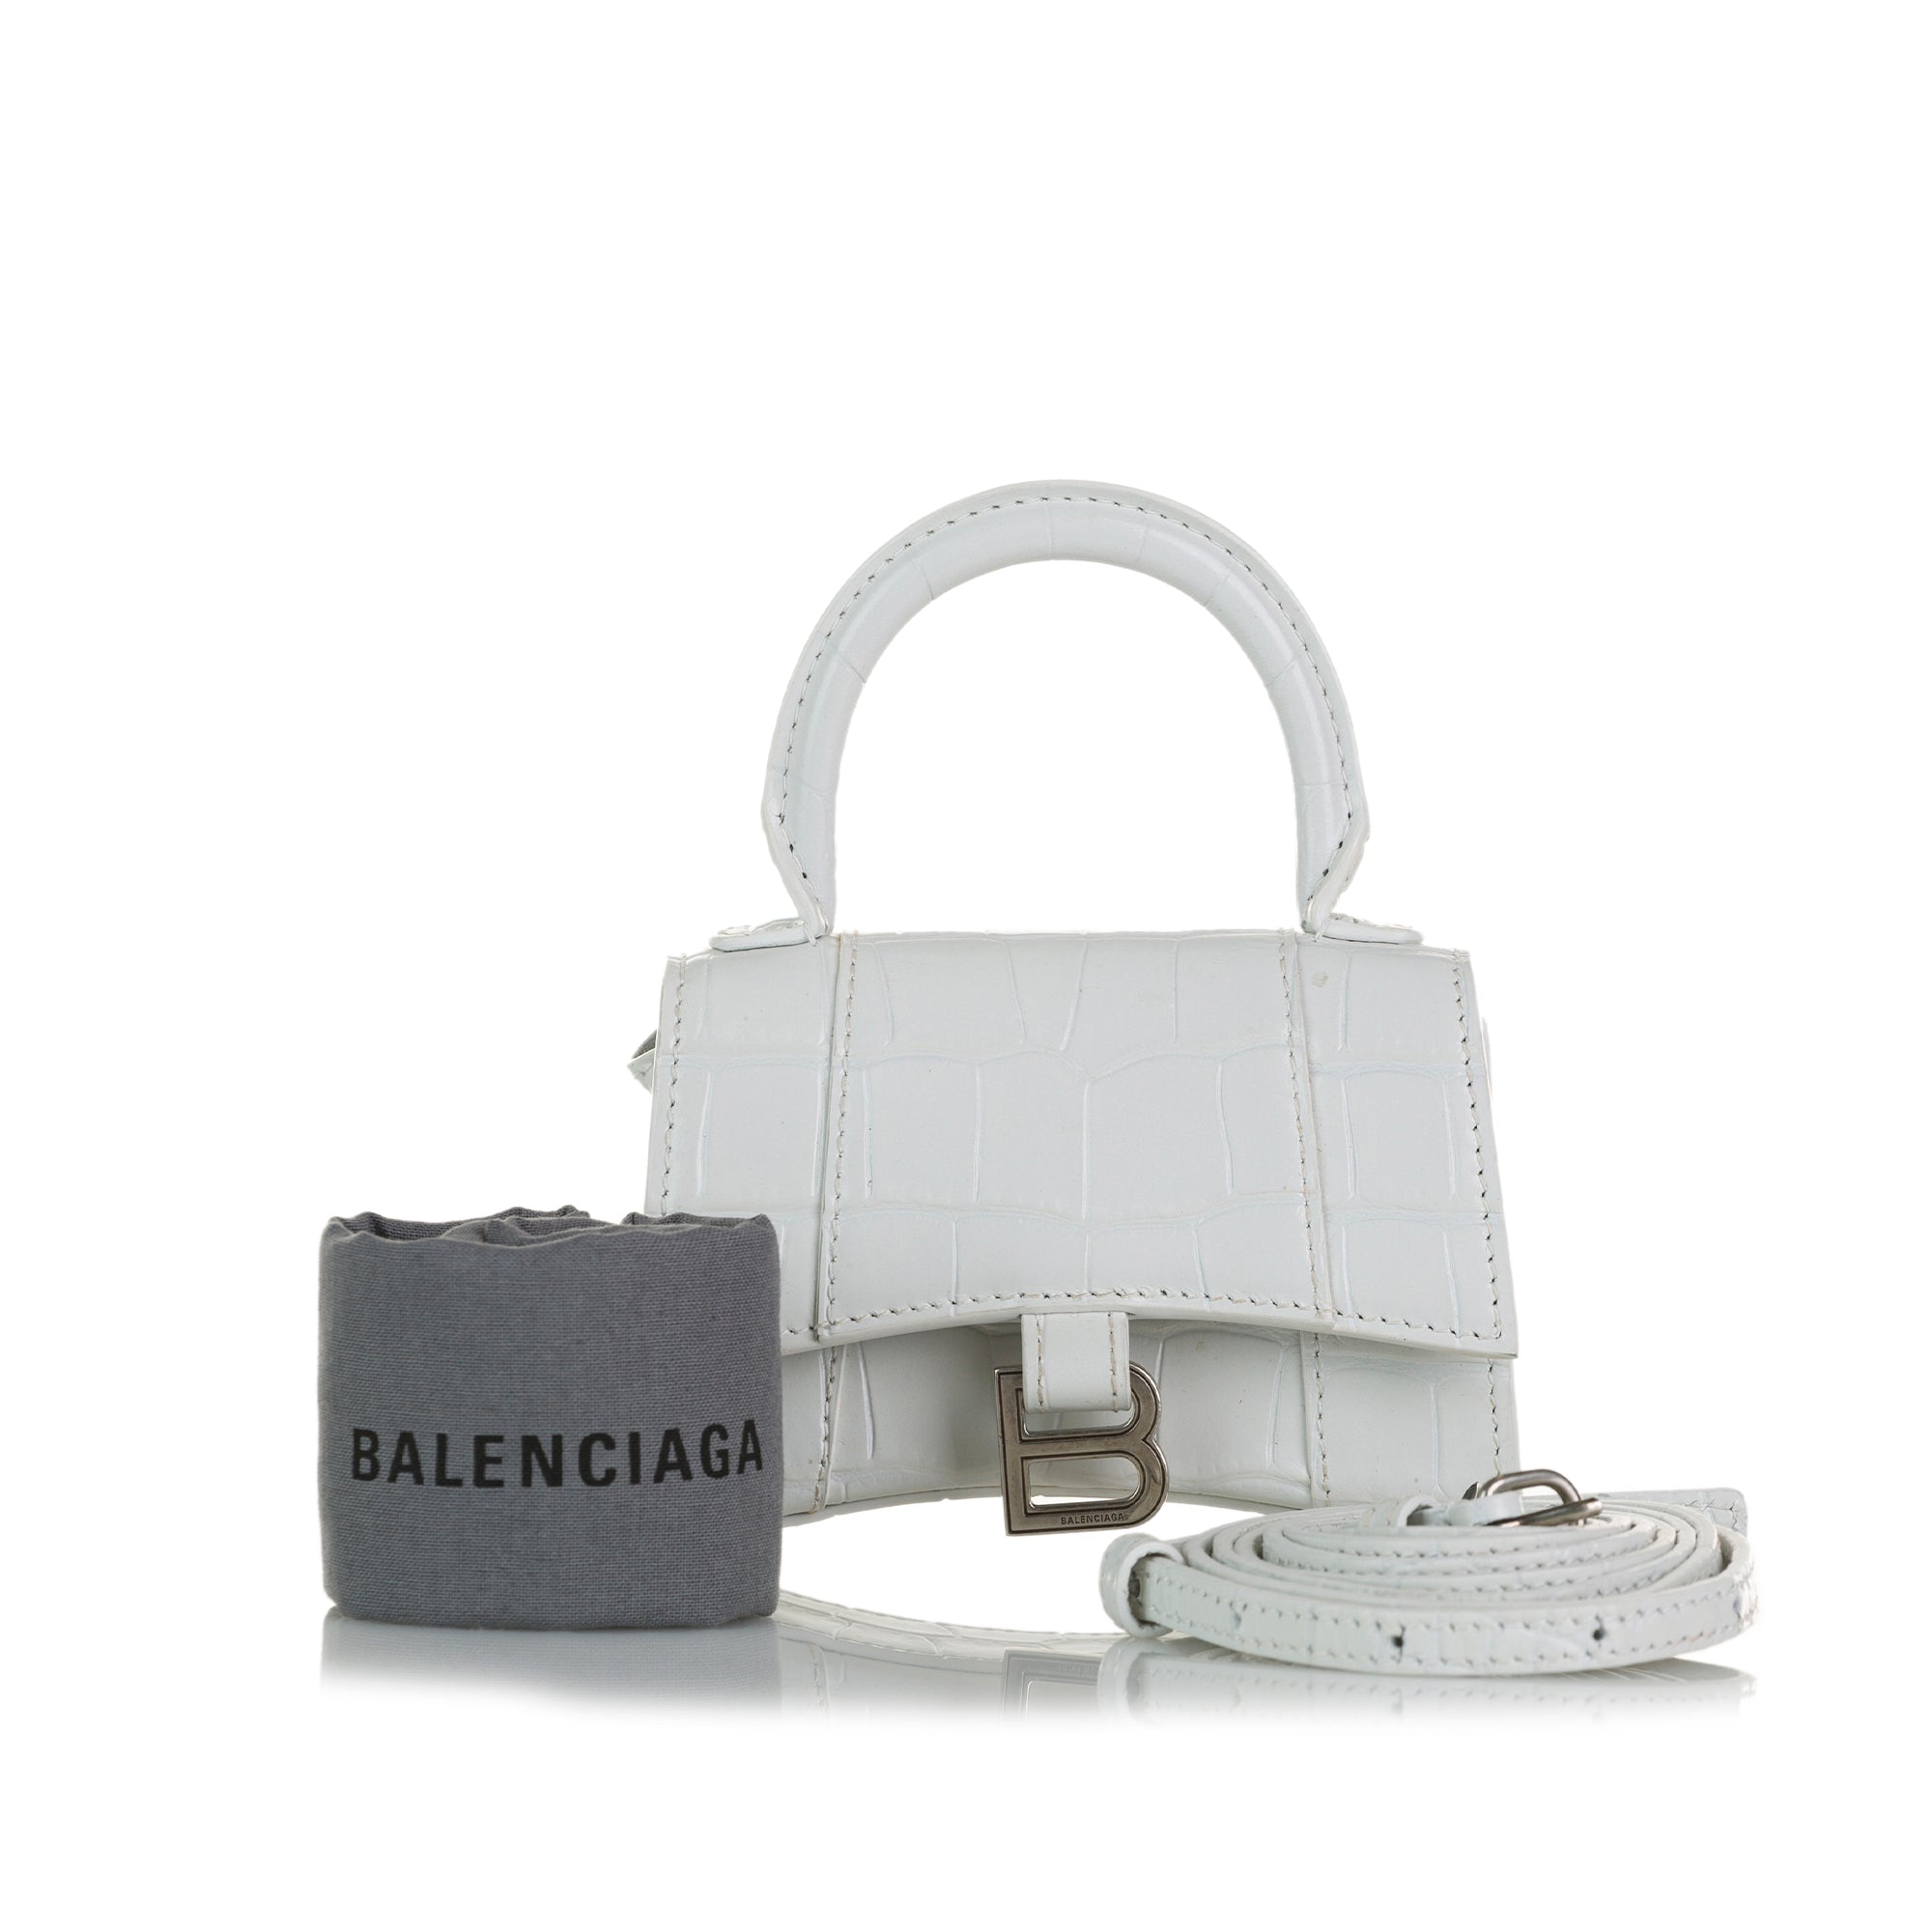 Balenciaga Small Hourglass Croc Embossed White Leather Bag New